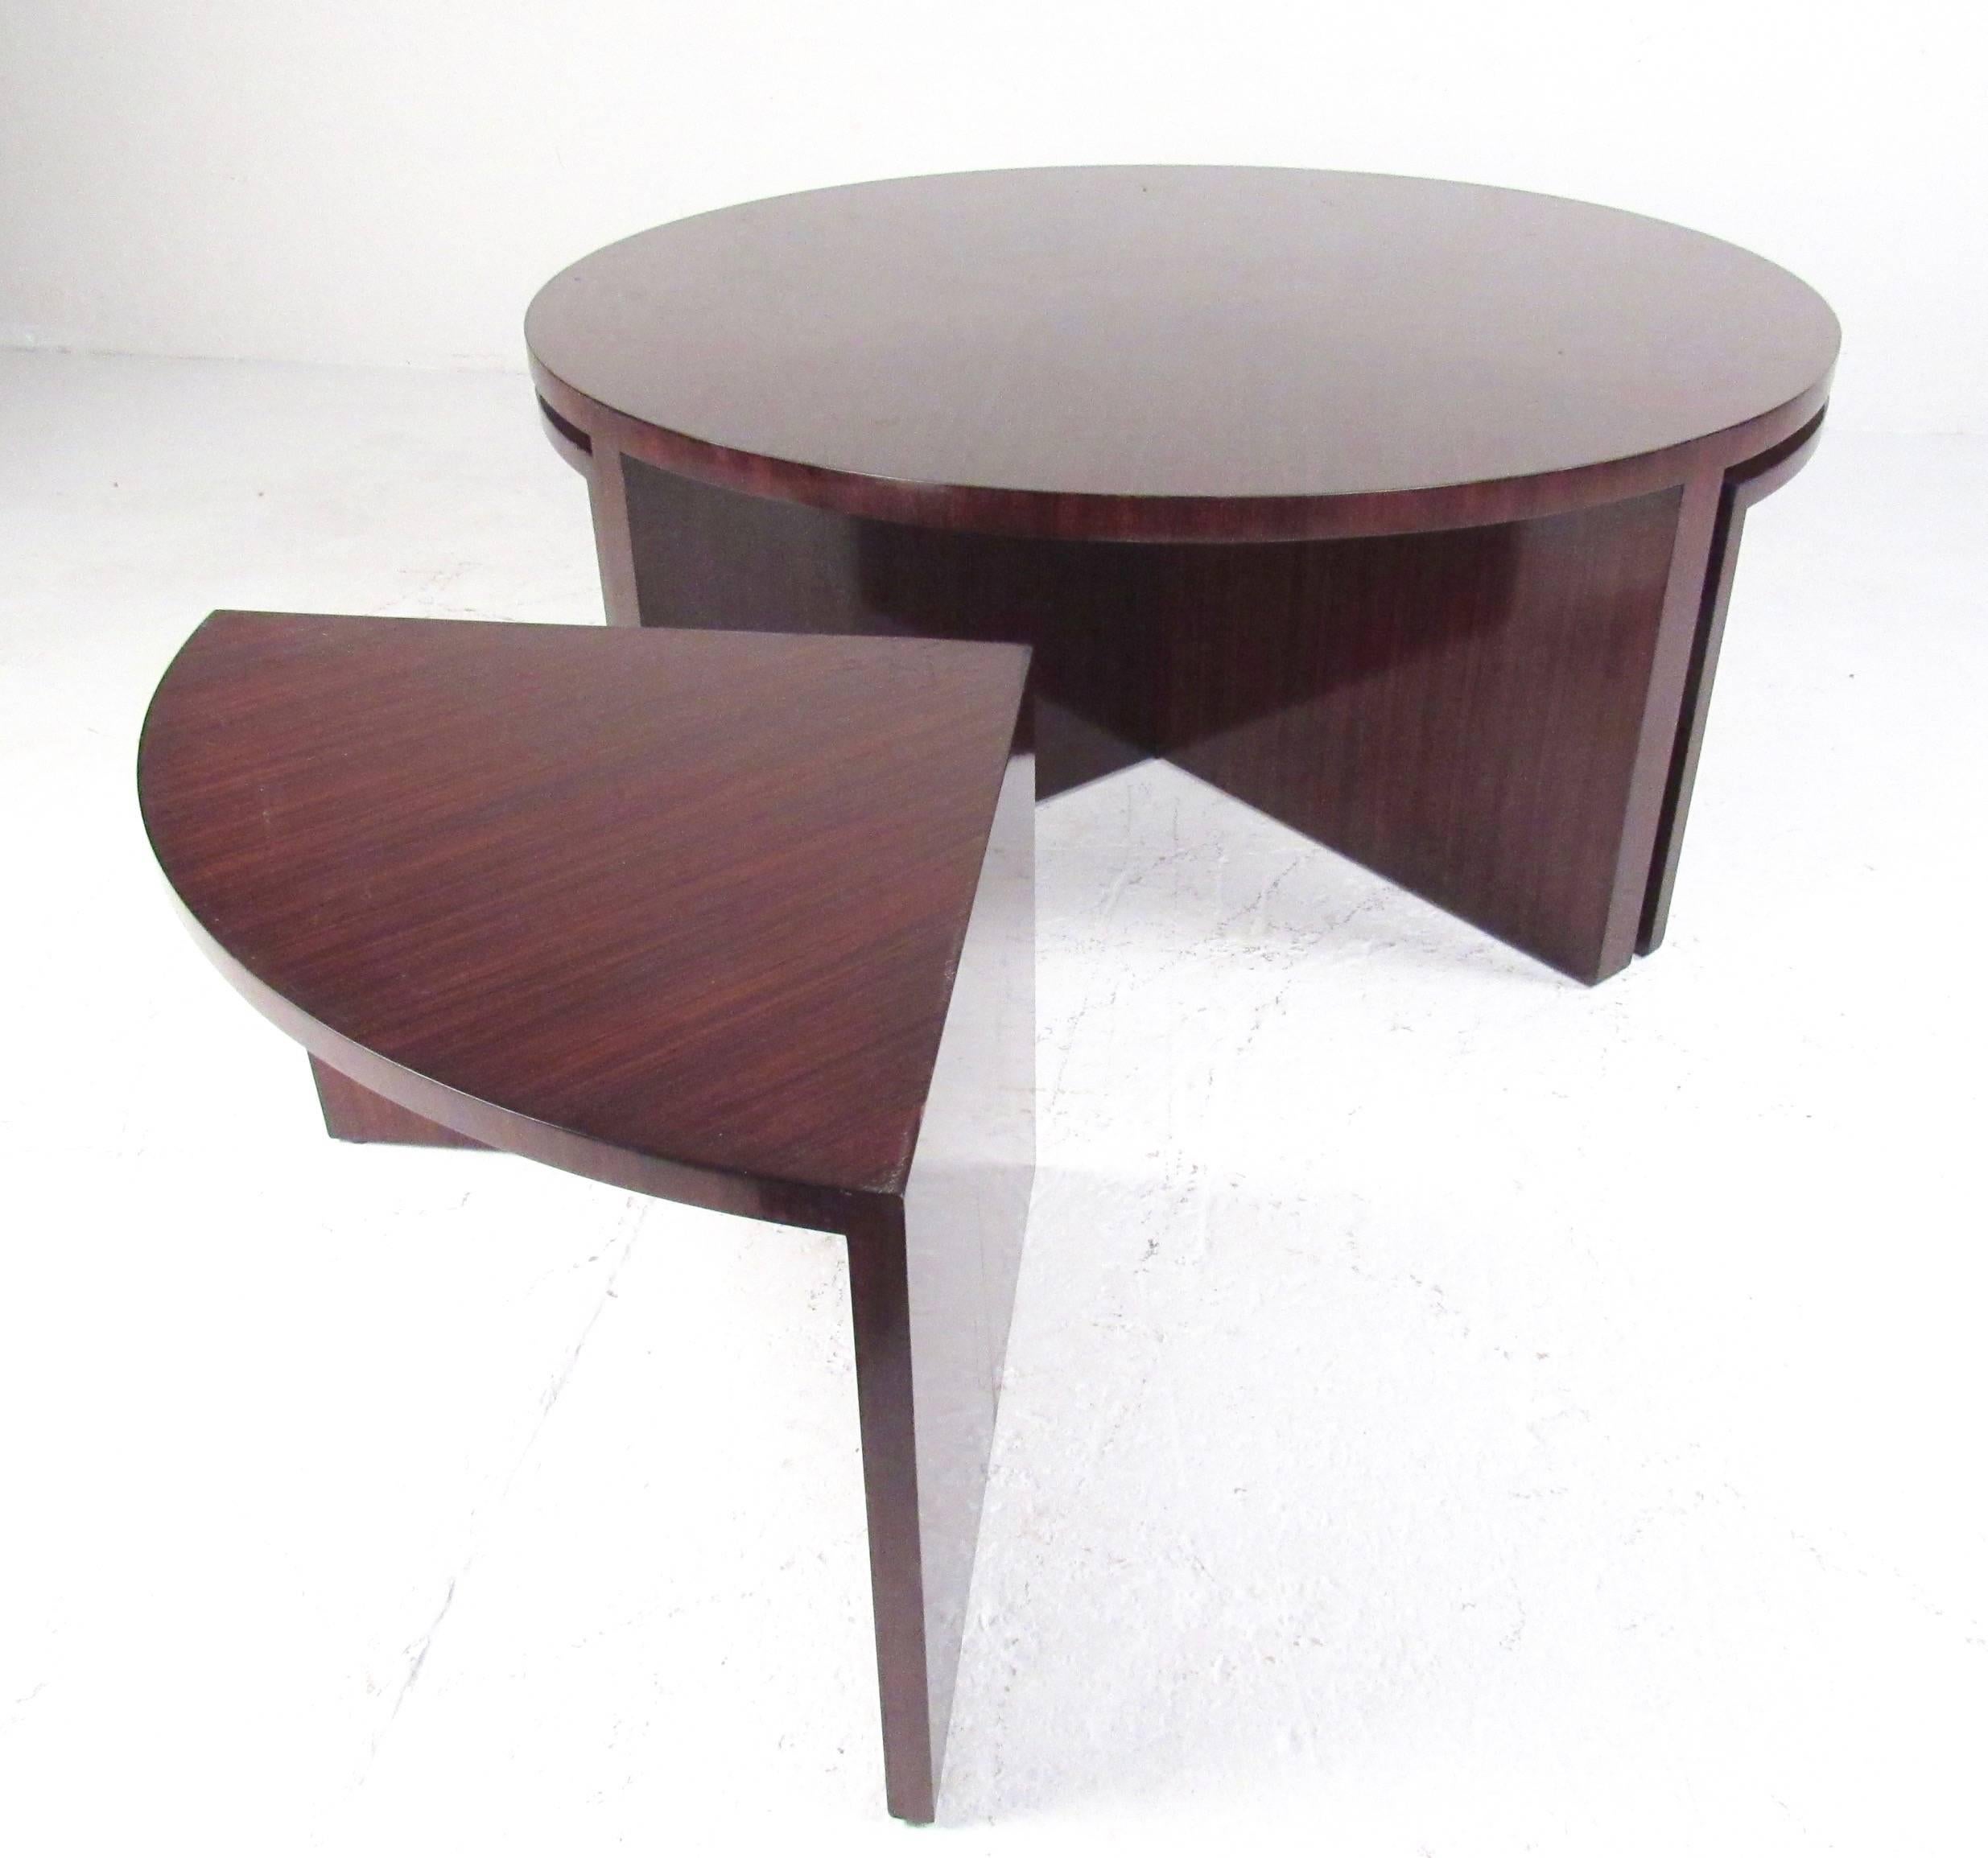 This stylish modern cocktail table comes complete with nesting bench stools. This Ralph Lauren 